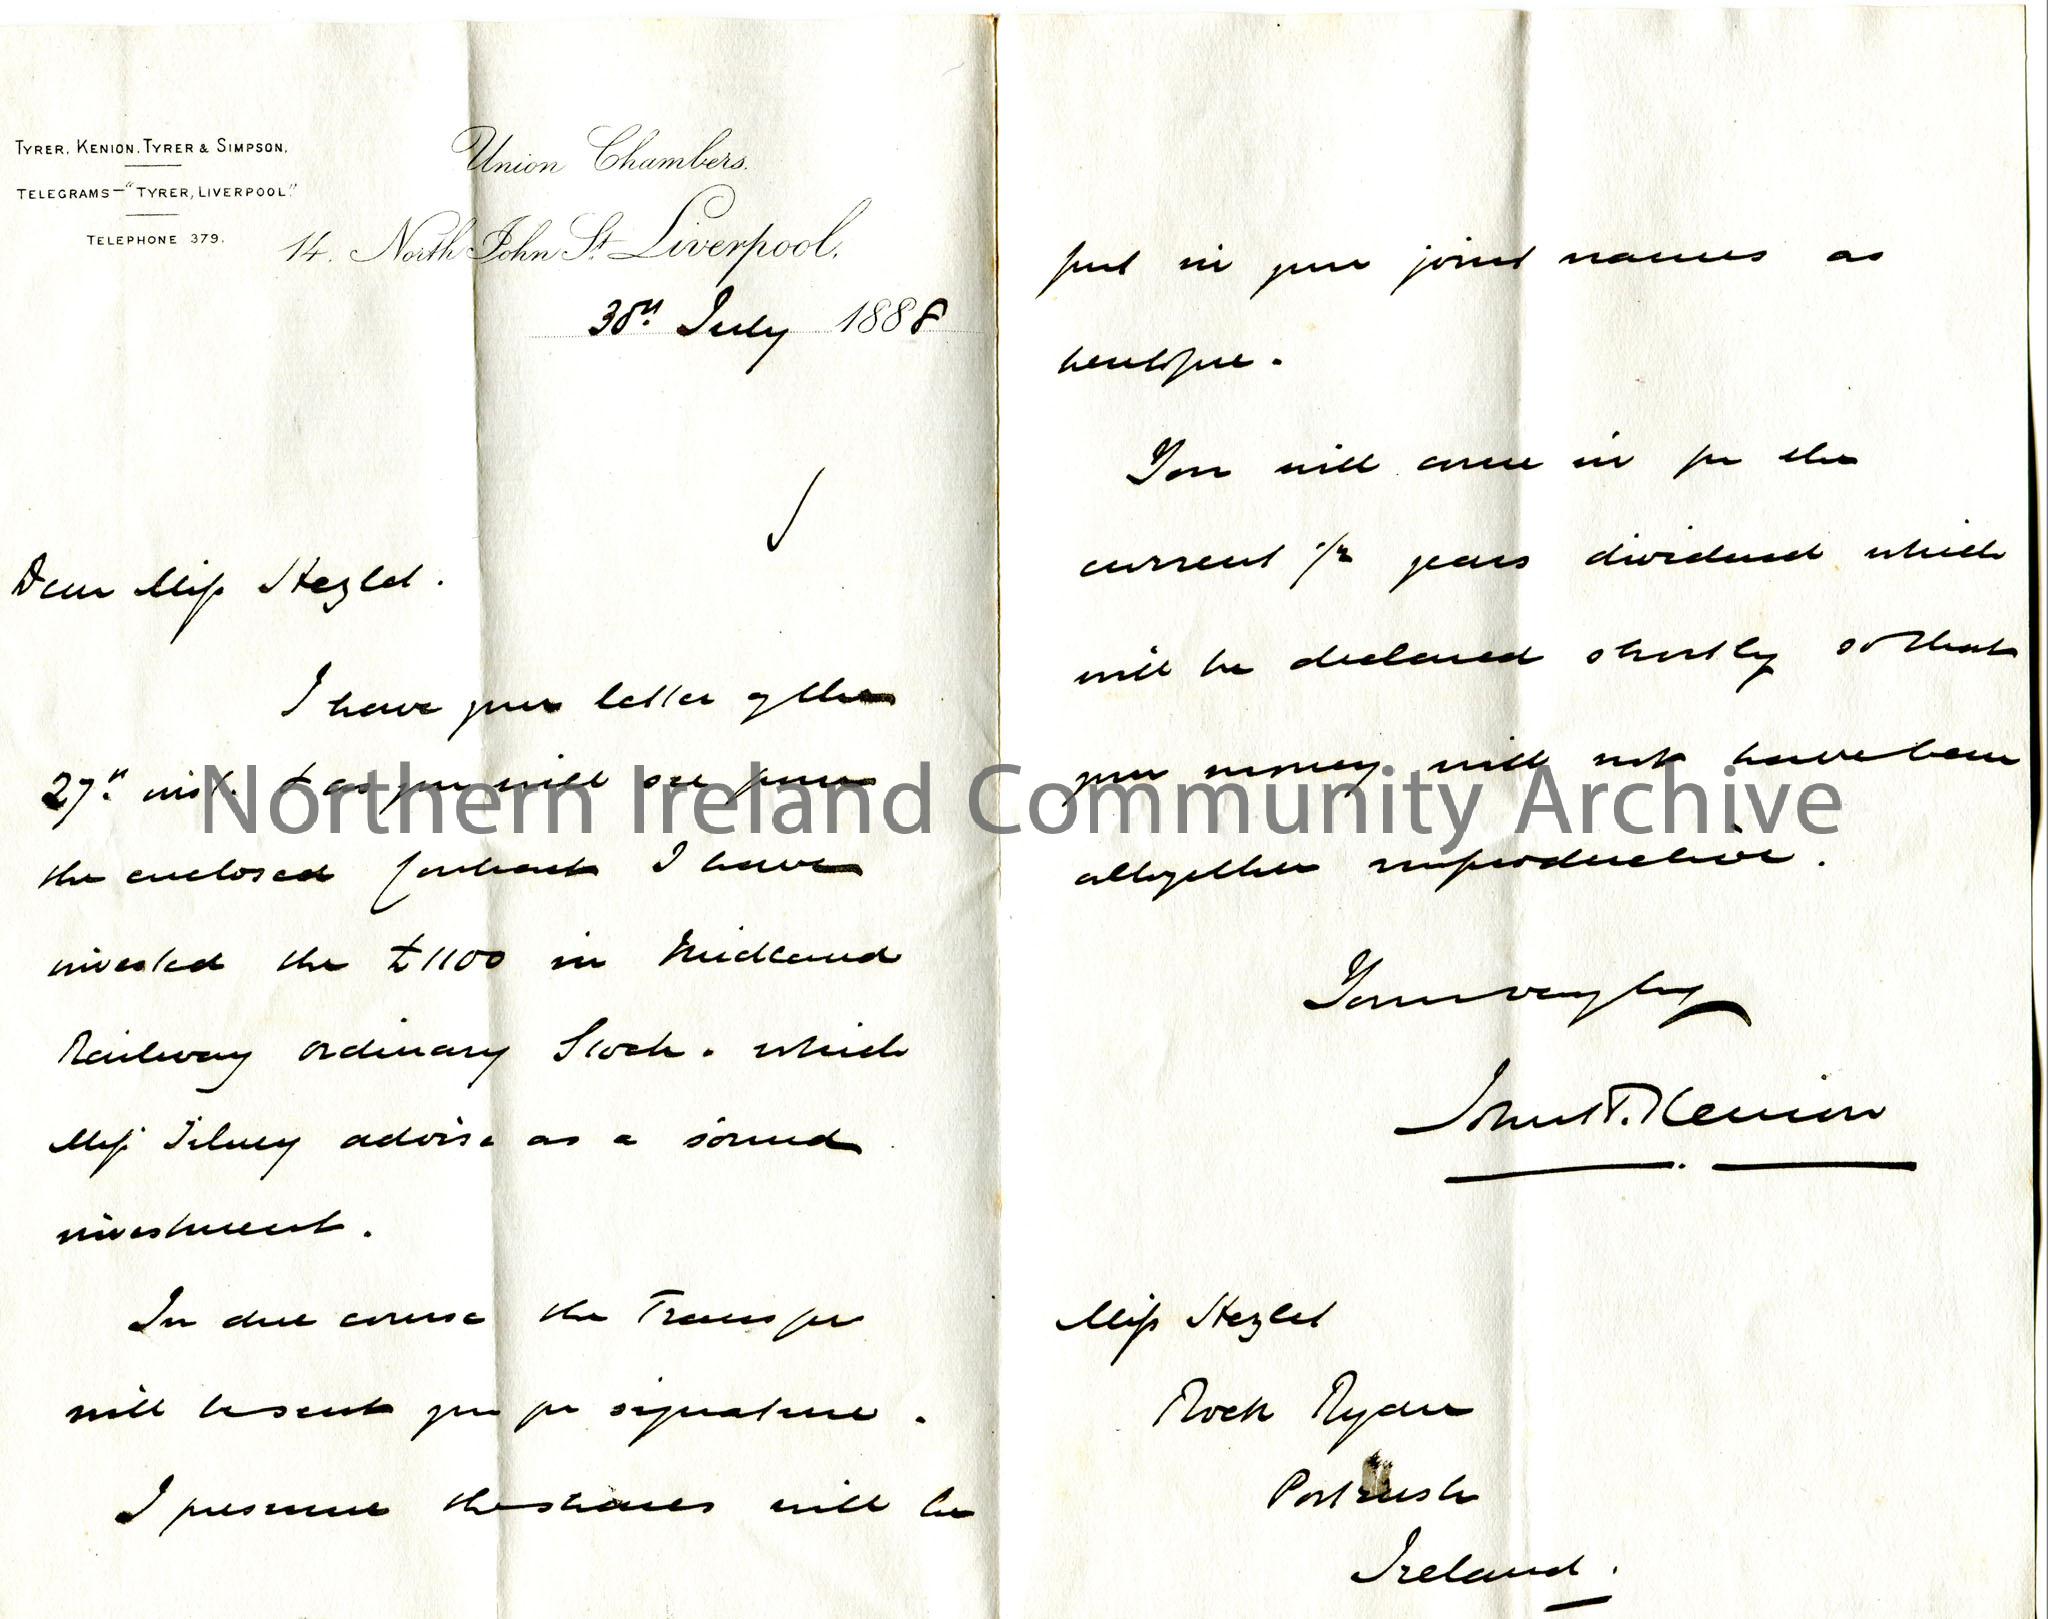 Handwritten letter to Miss Hezlet at Rock Ryan, Portrush, Ireland. Kenion has invested £1100 in Midland Railway Ordinary Stock as instructed by M…